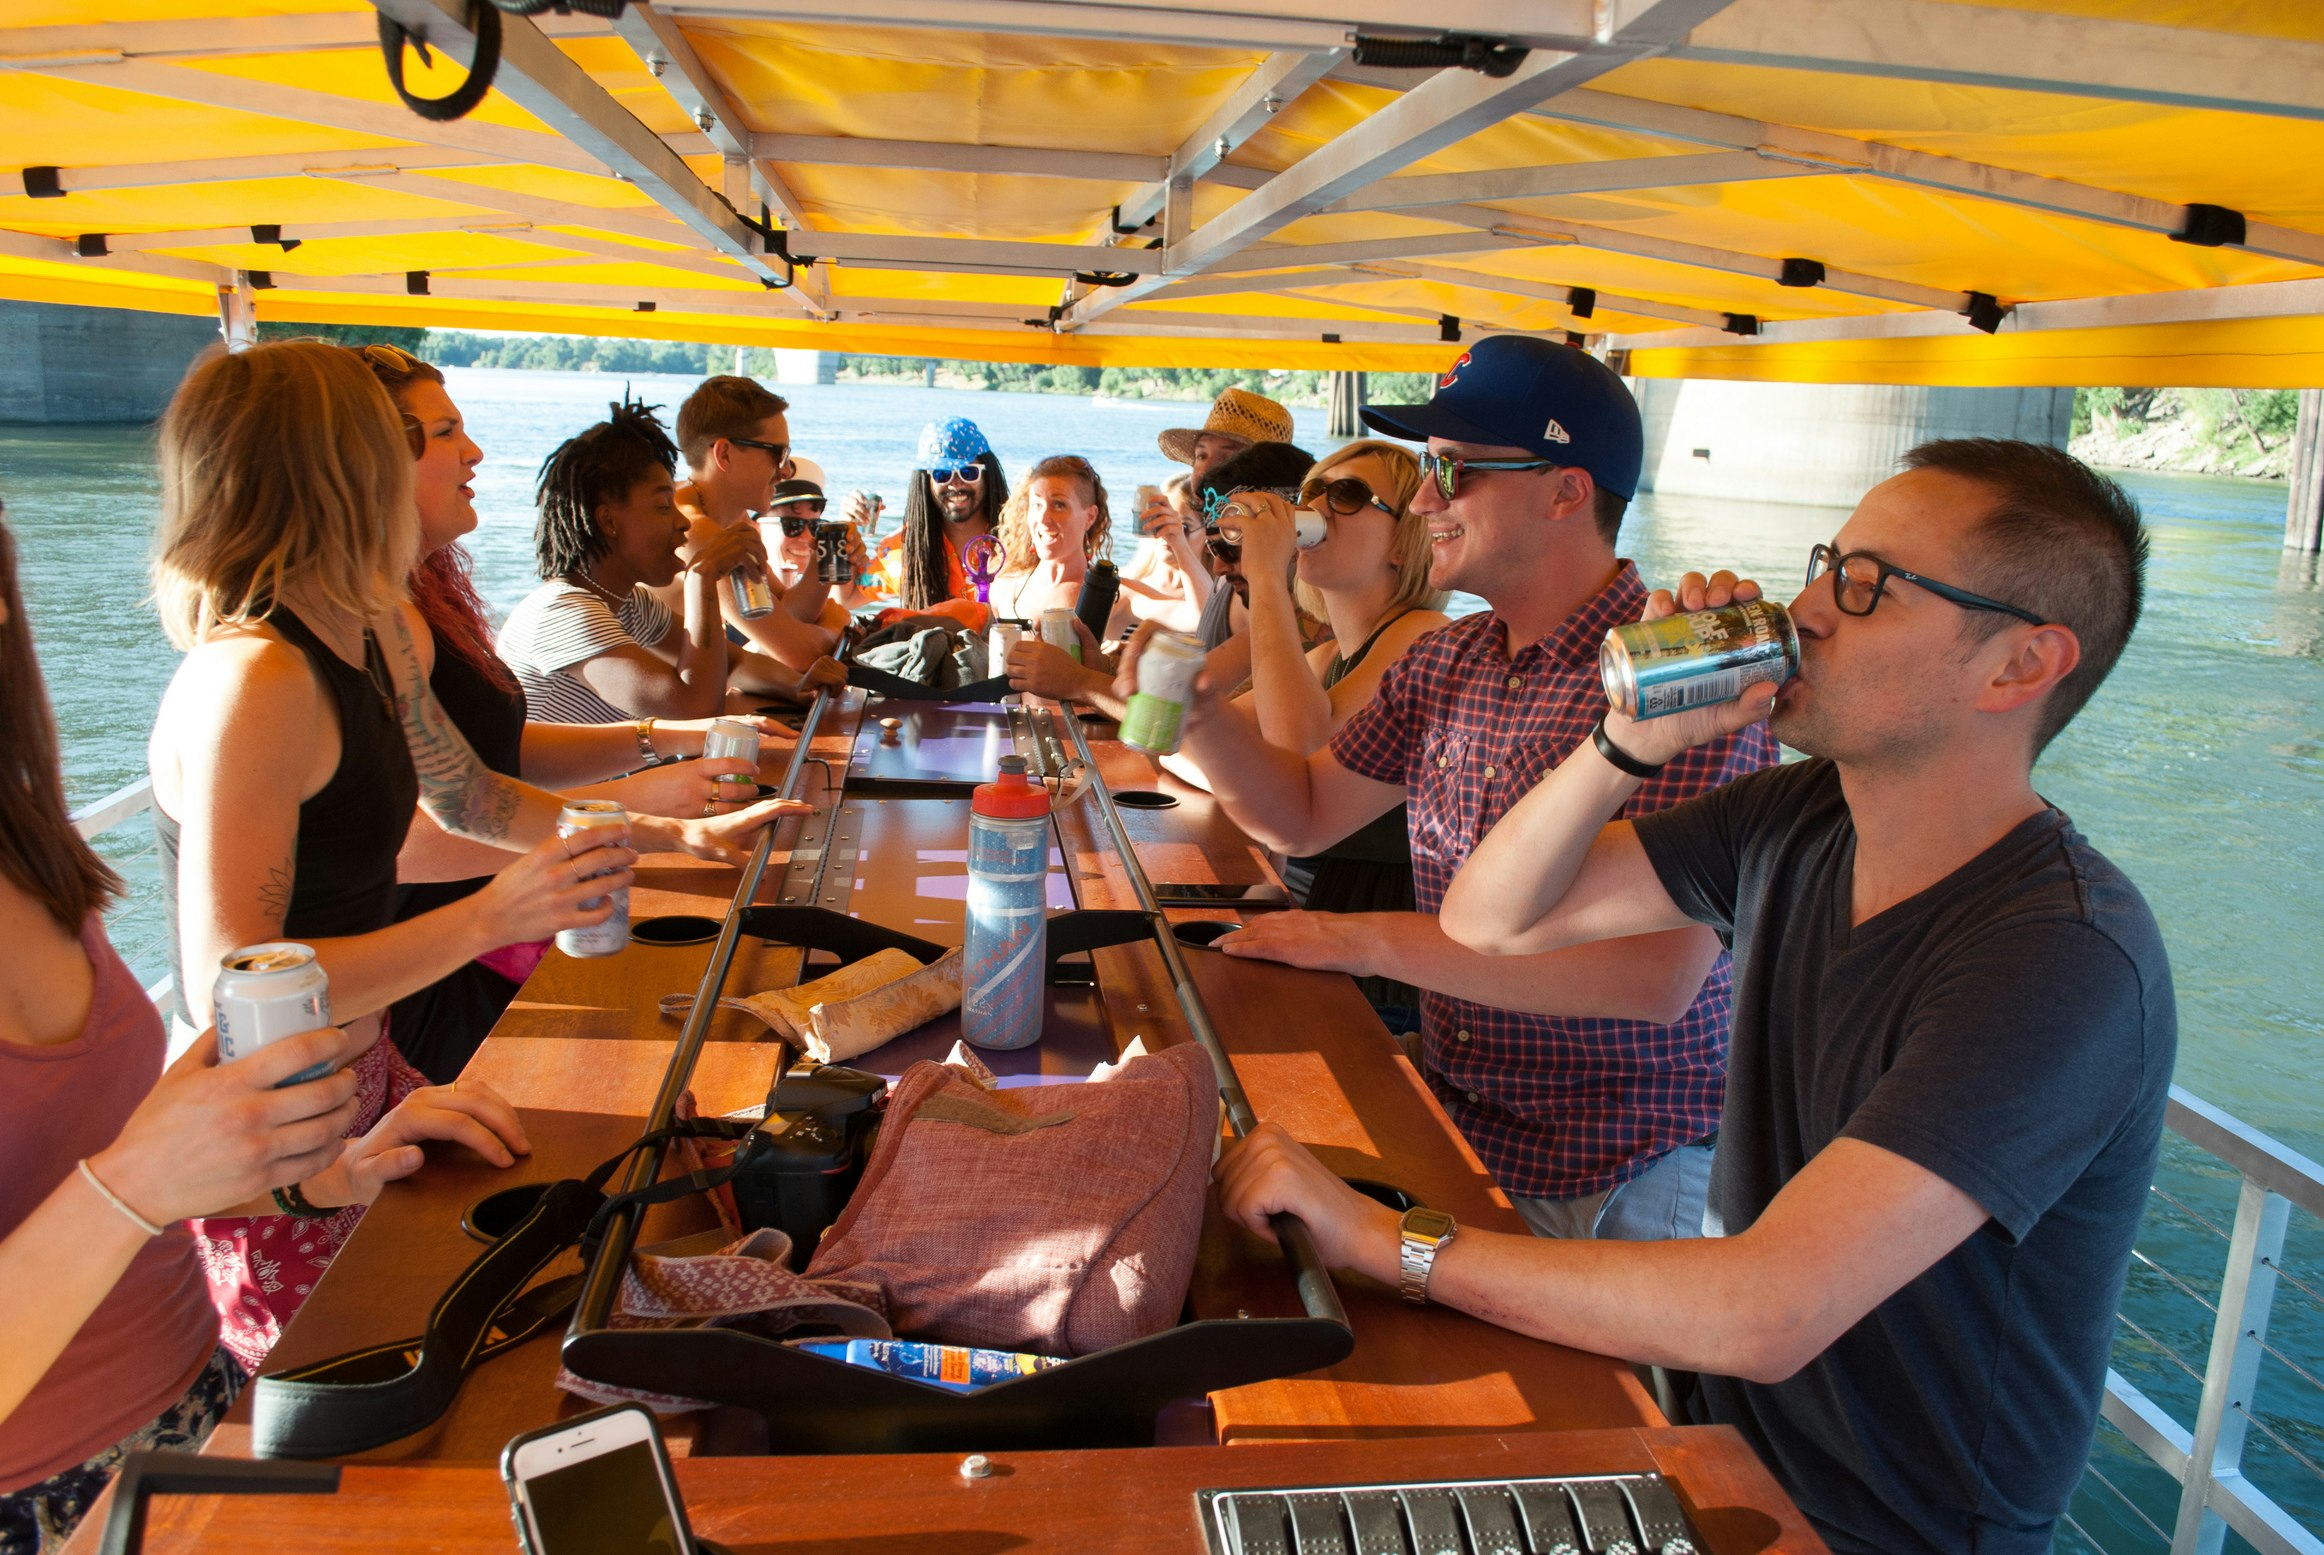 People sitting around a bar on a boat with an awning overhead